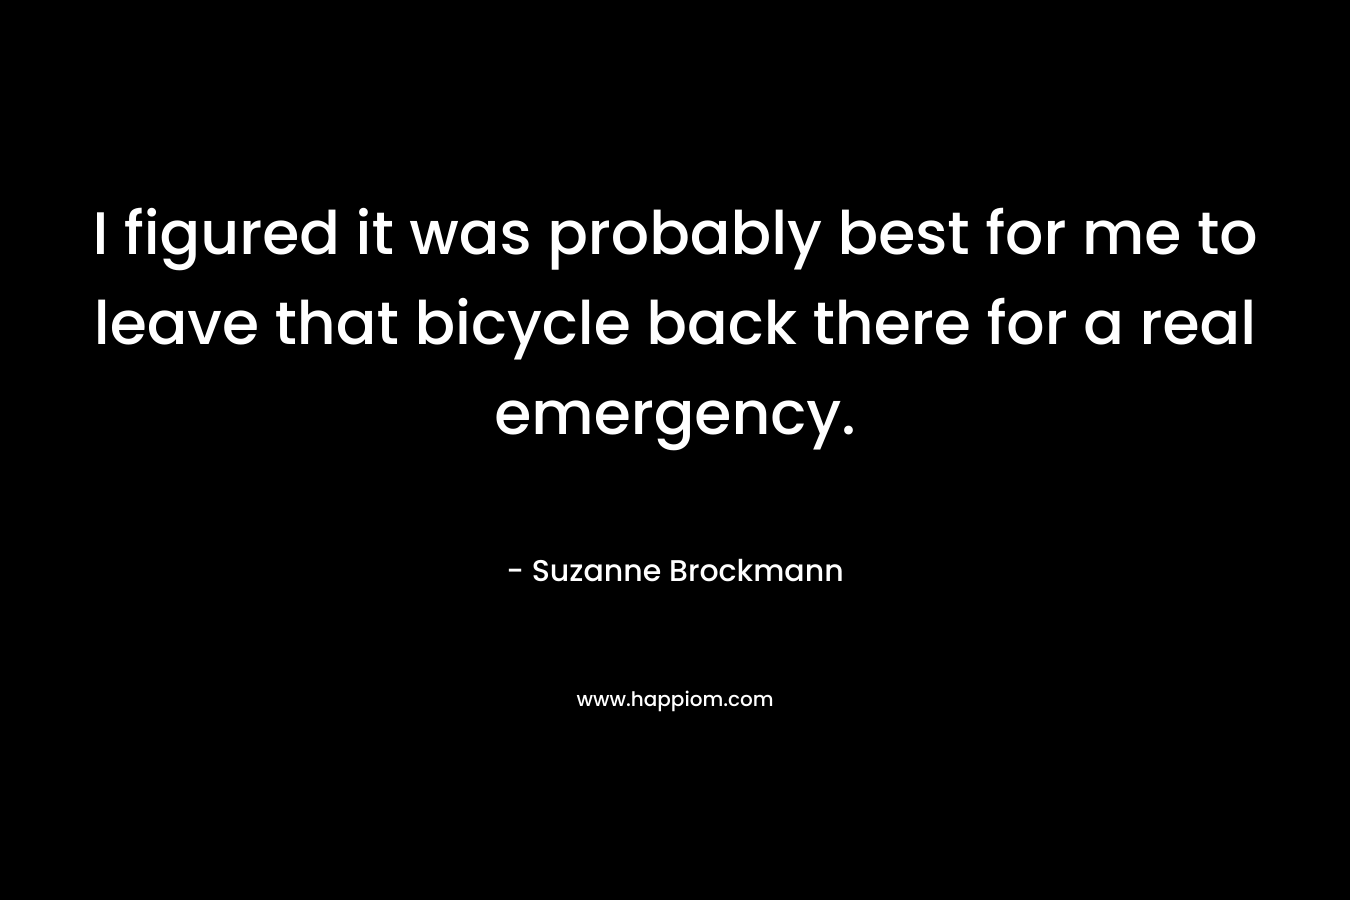 I figured it was probably best for me to leave that bicycle back there for a real emergency.